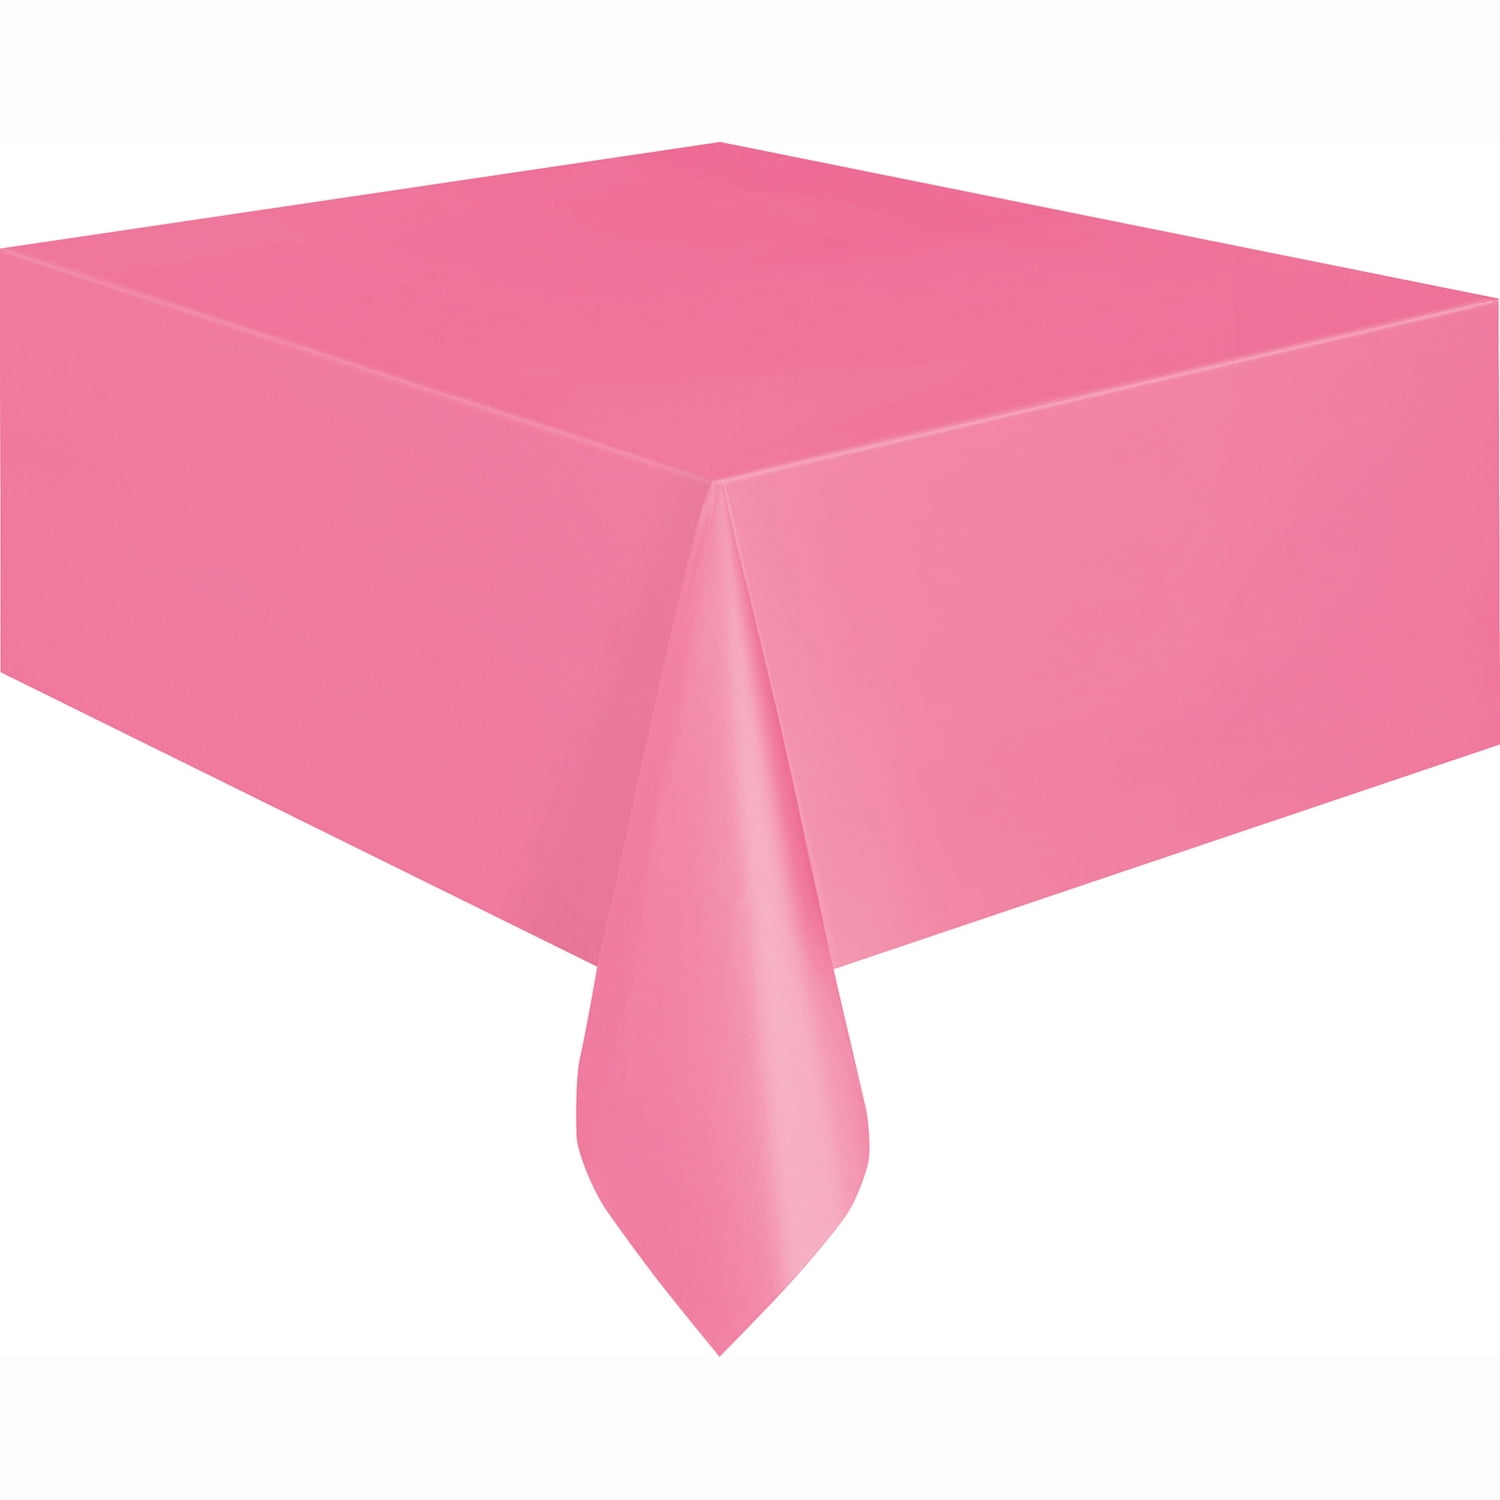 Light Pink Plastic Party Tablecloth